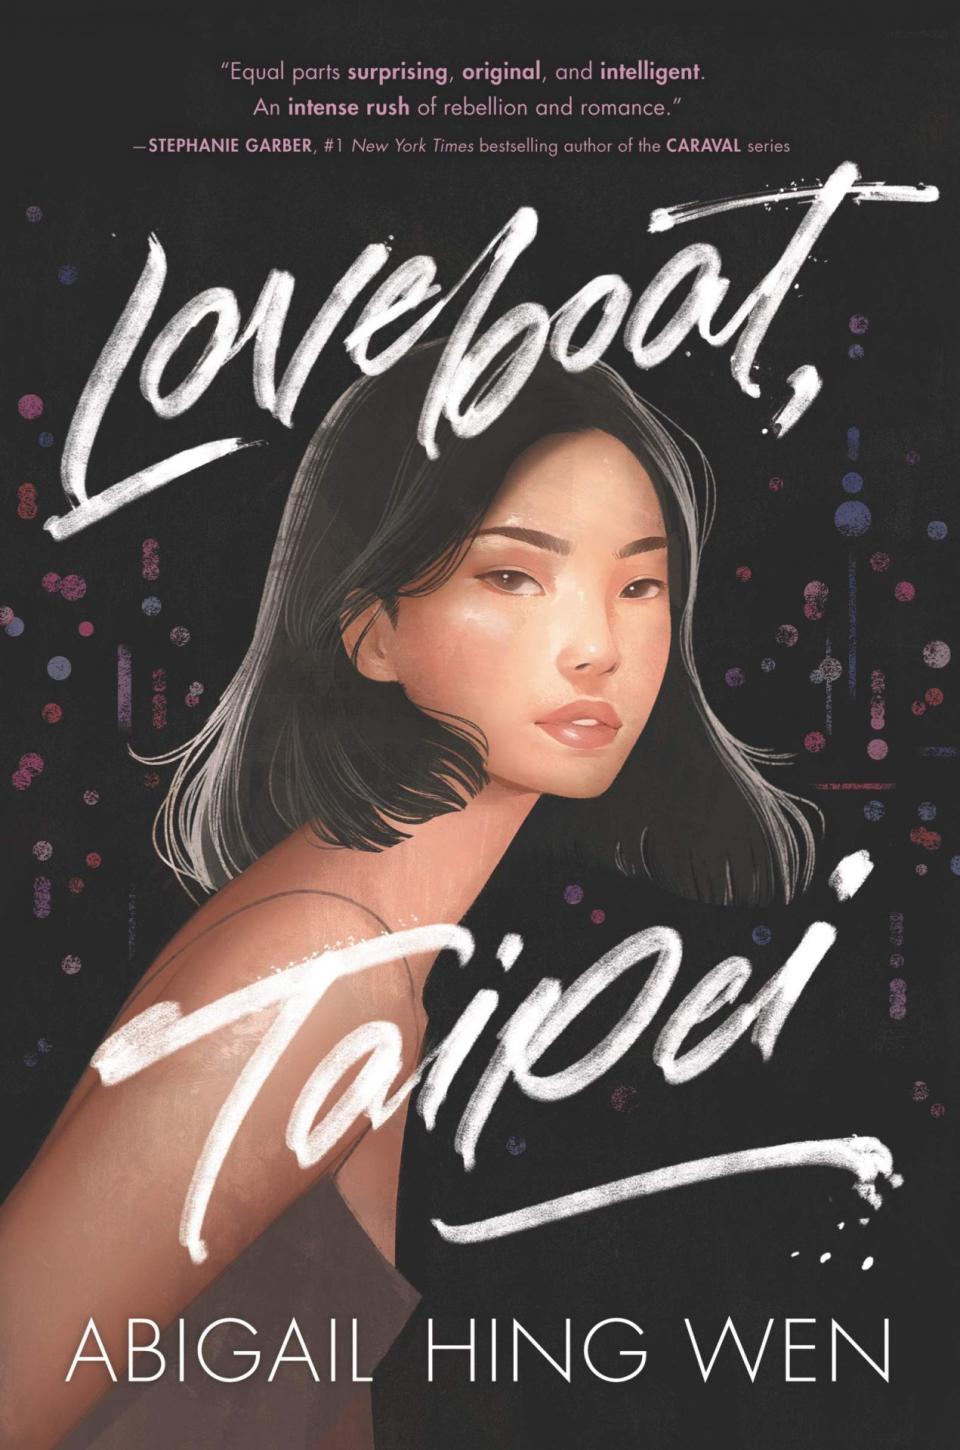 The cover for Loveboat, Taipei shows a painting of a young Asian woman Ever looking at the reader, the title Loveboat, Taipei circles her face